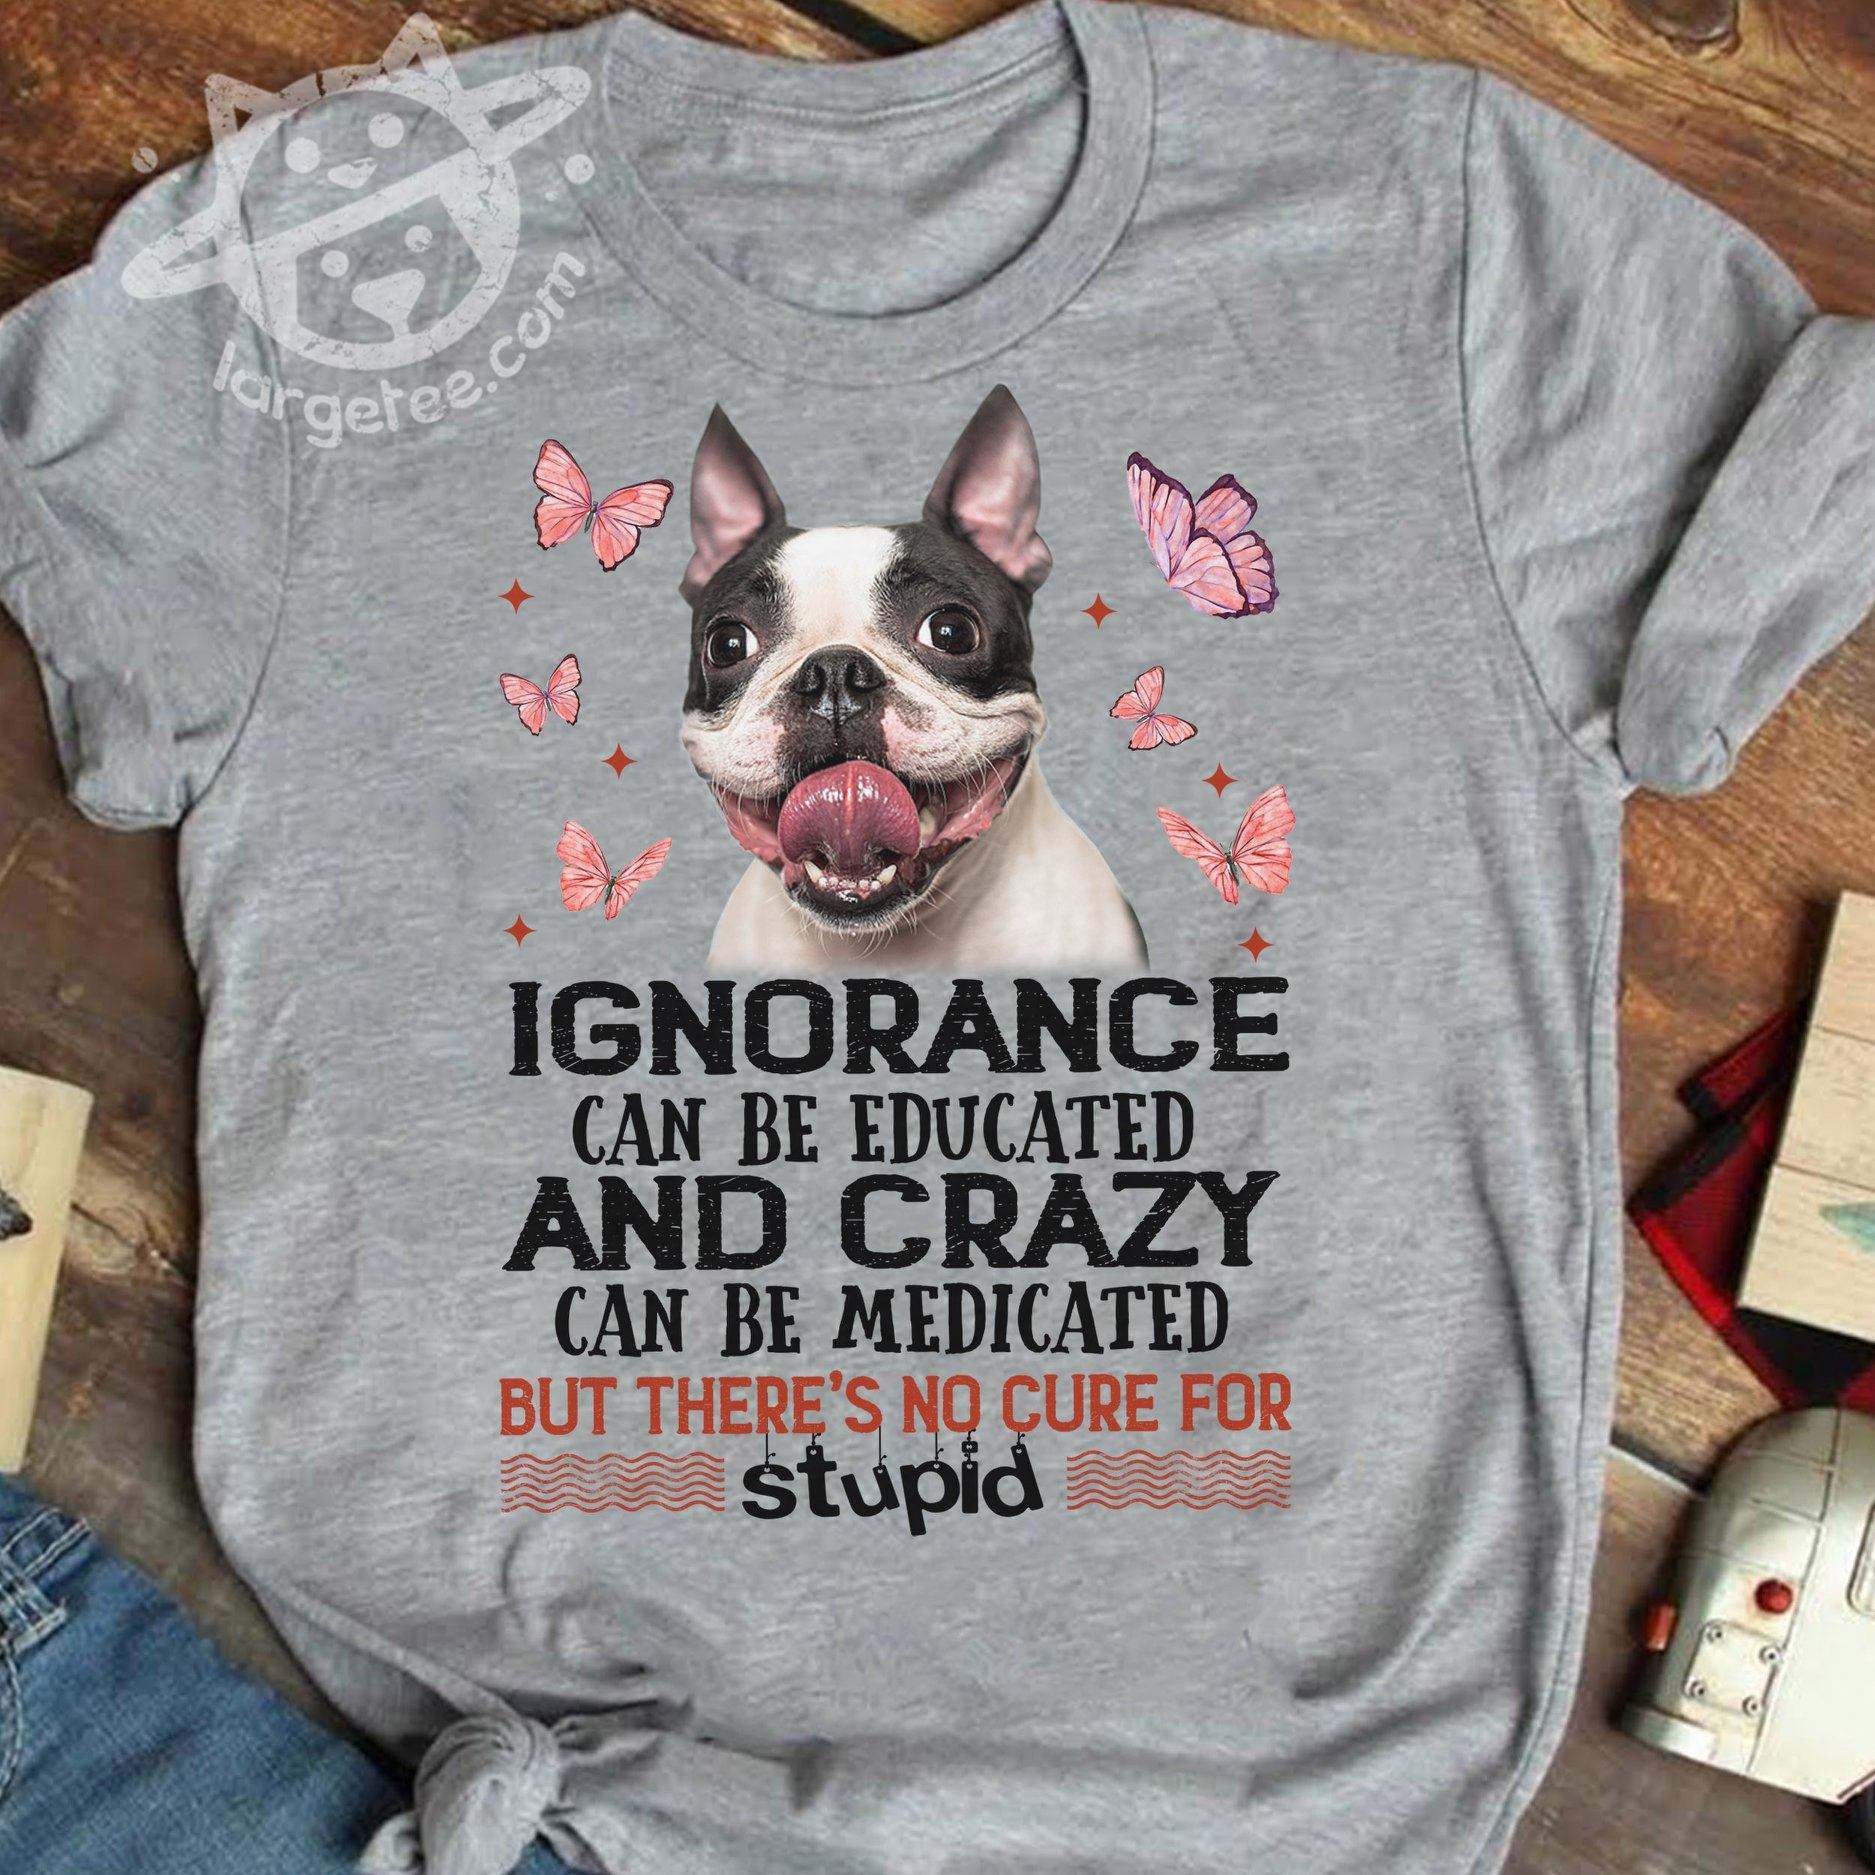 Ignorance Dog - Ignorance can be educated and crazy can be medicated but there's no cure for stupid